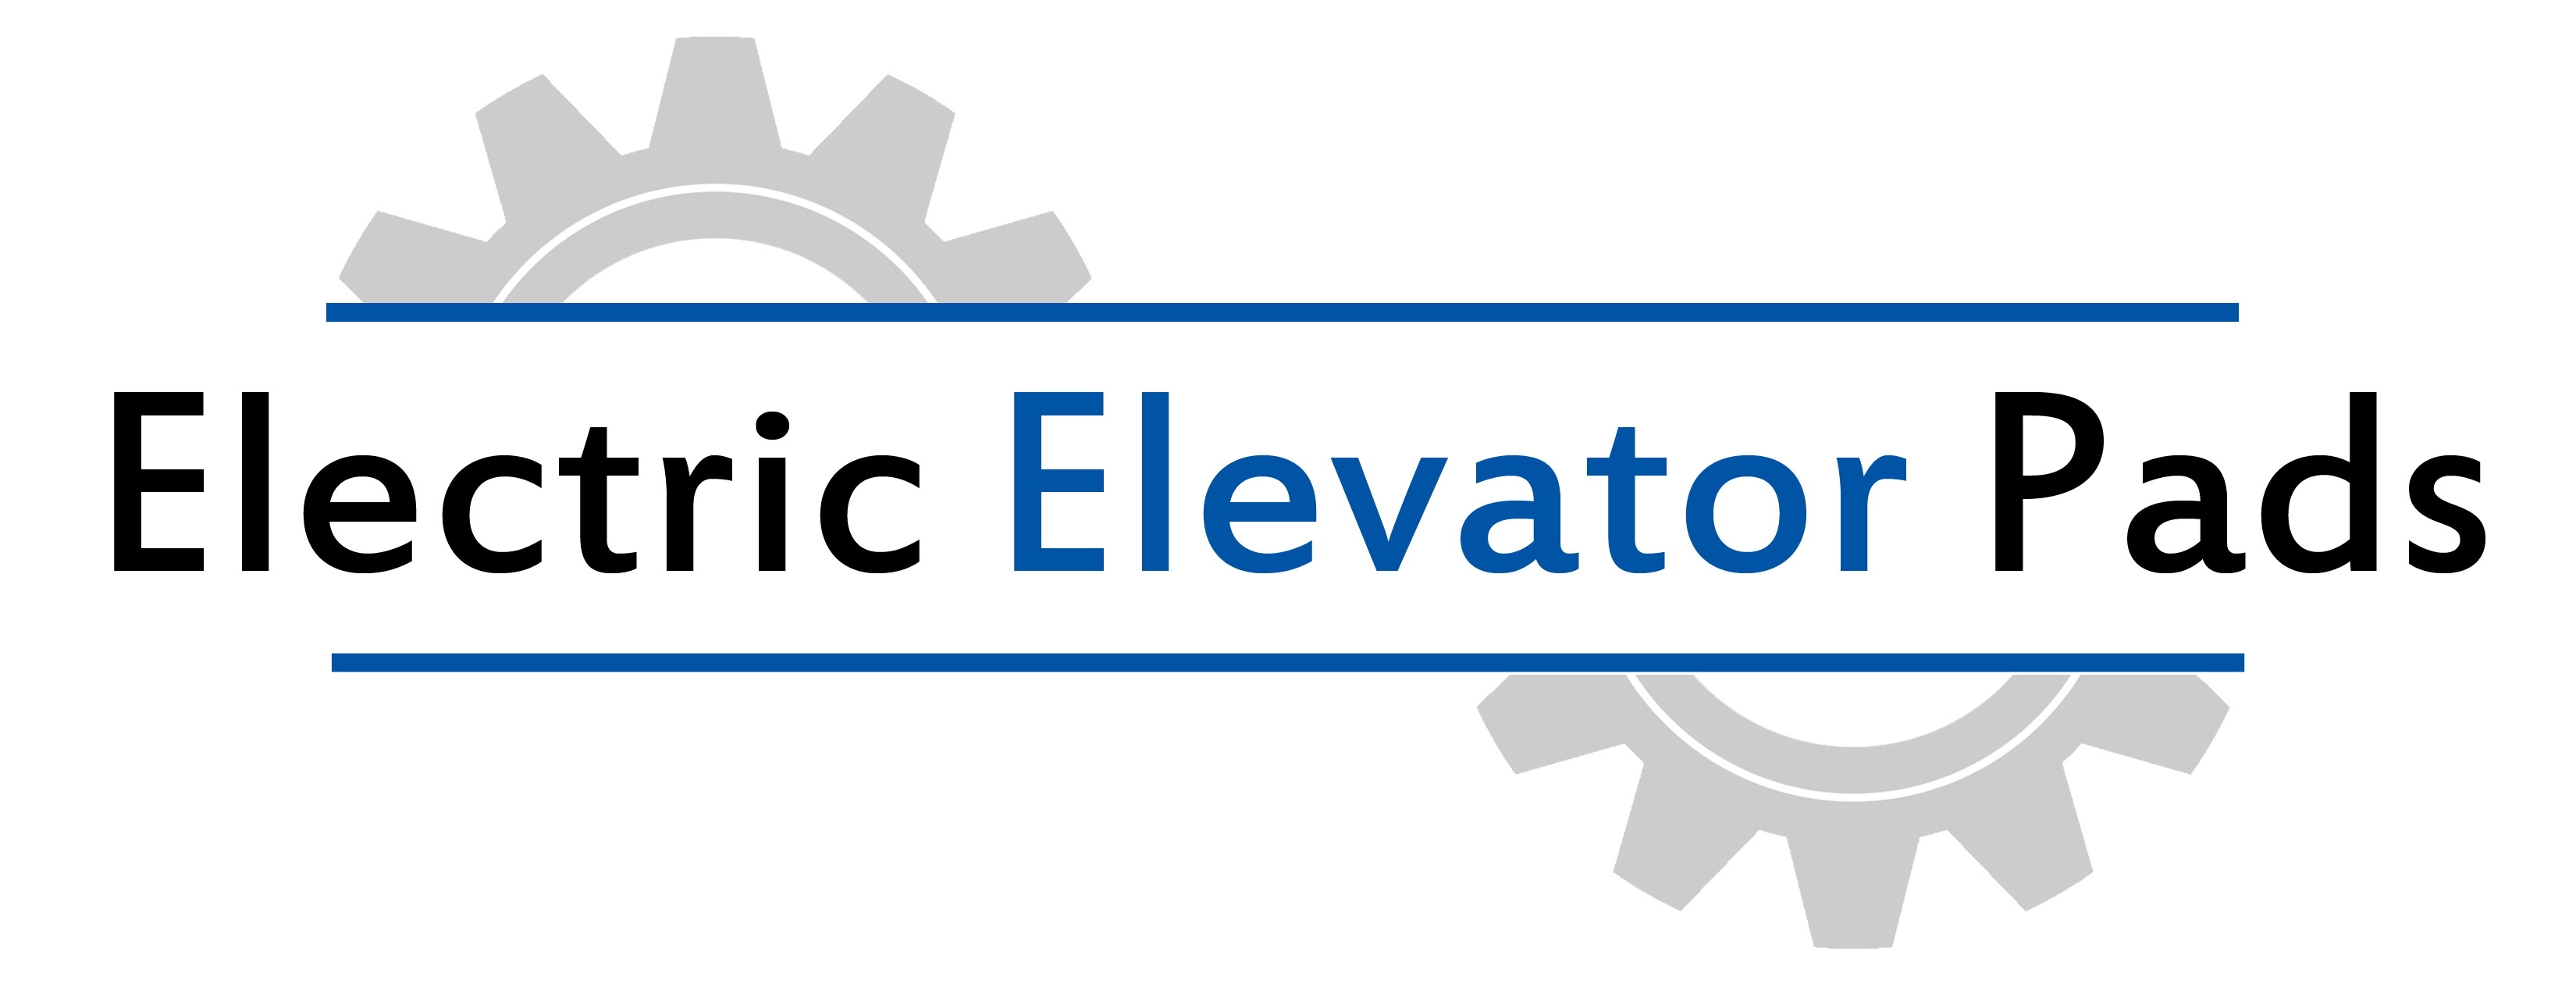 Electric Elevator pads will prevent wear and tear